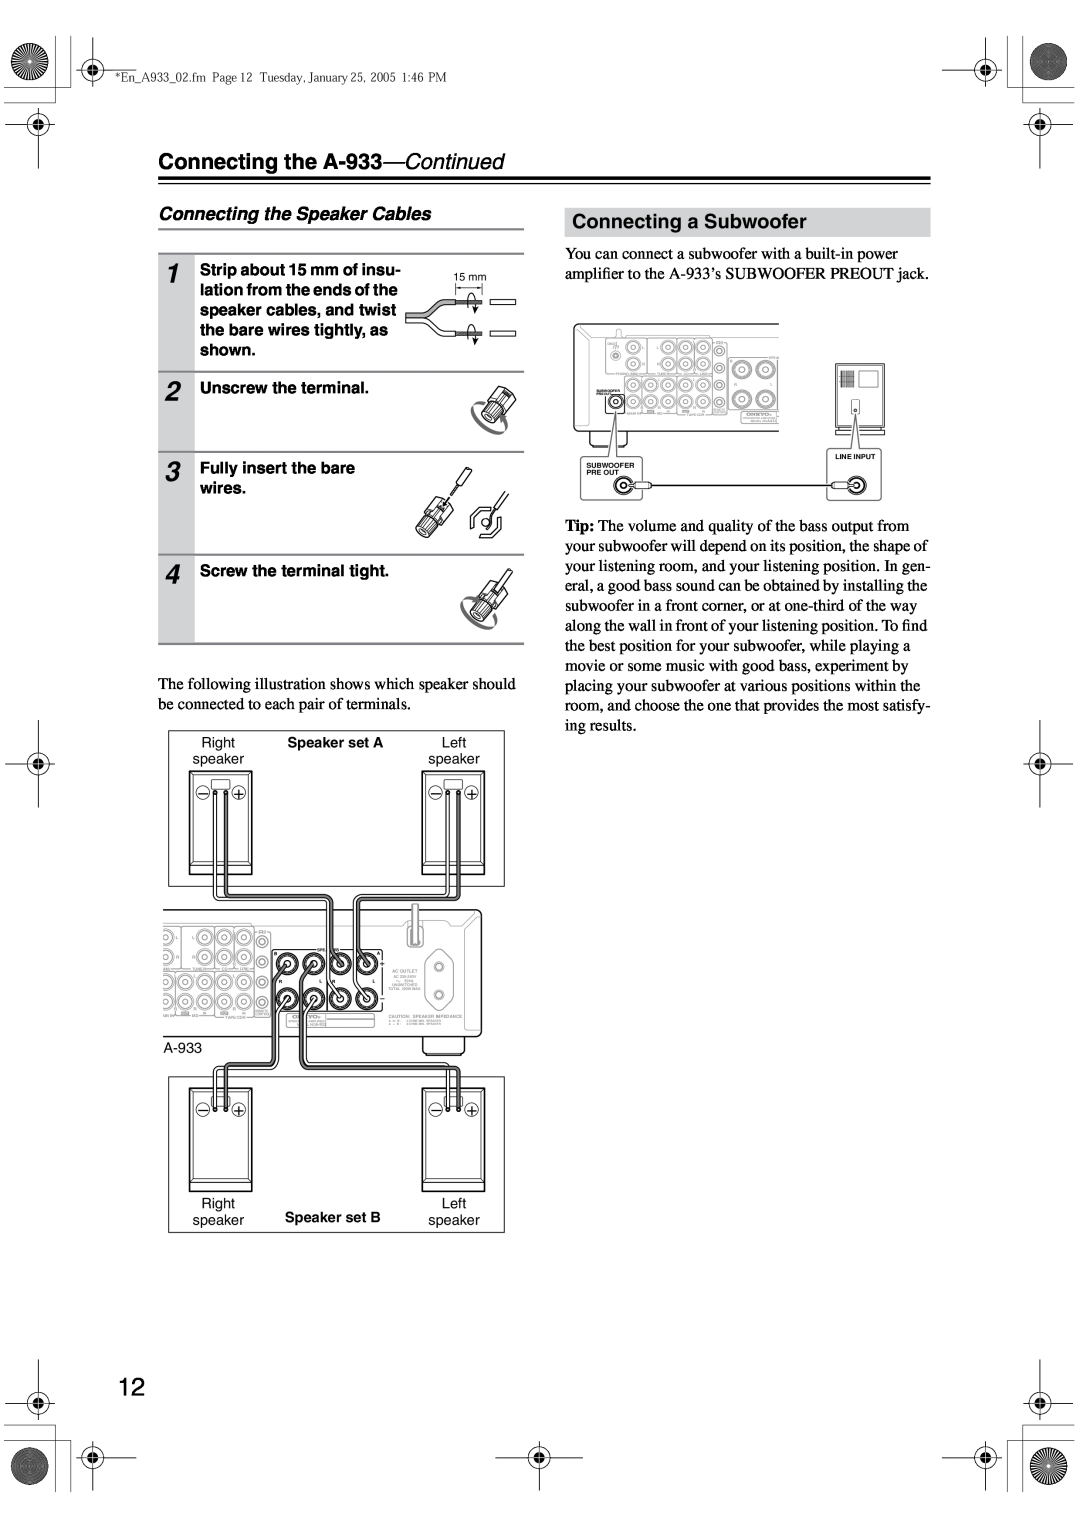 Onkyo instruction manual Connecting a Subwoofer, Connecting the Speaker Cables, Connecting the A-933-Continued 